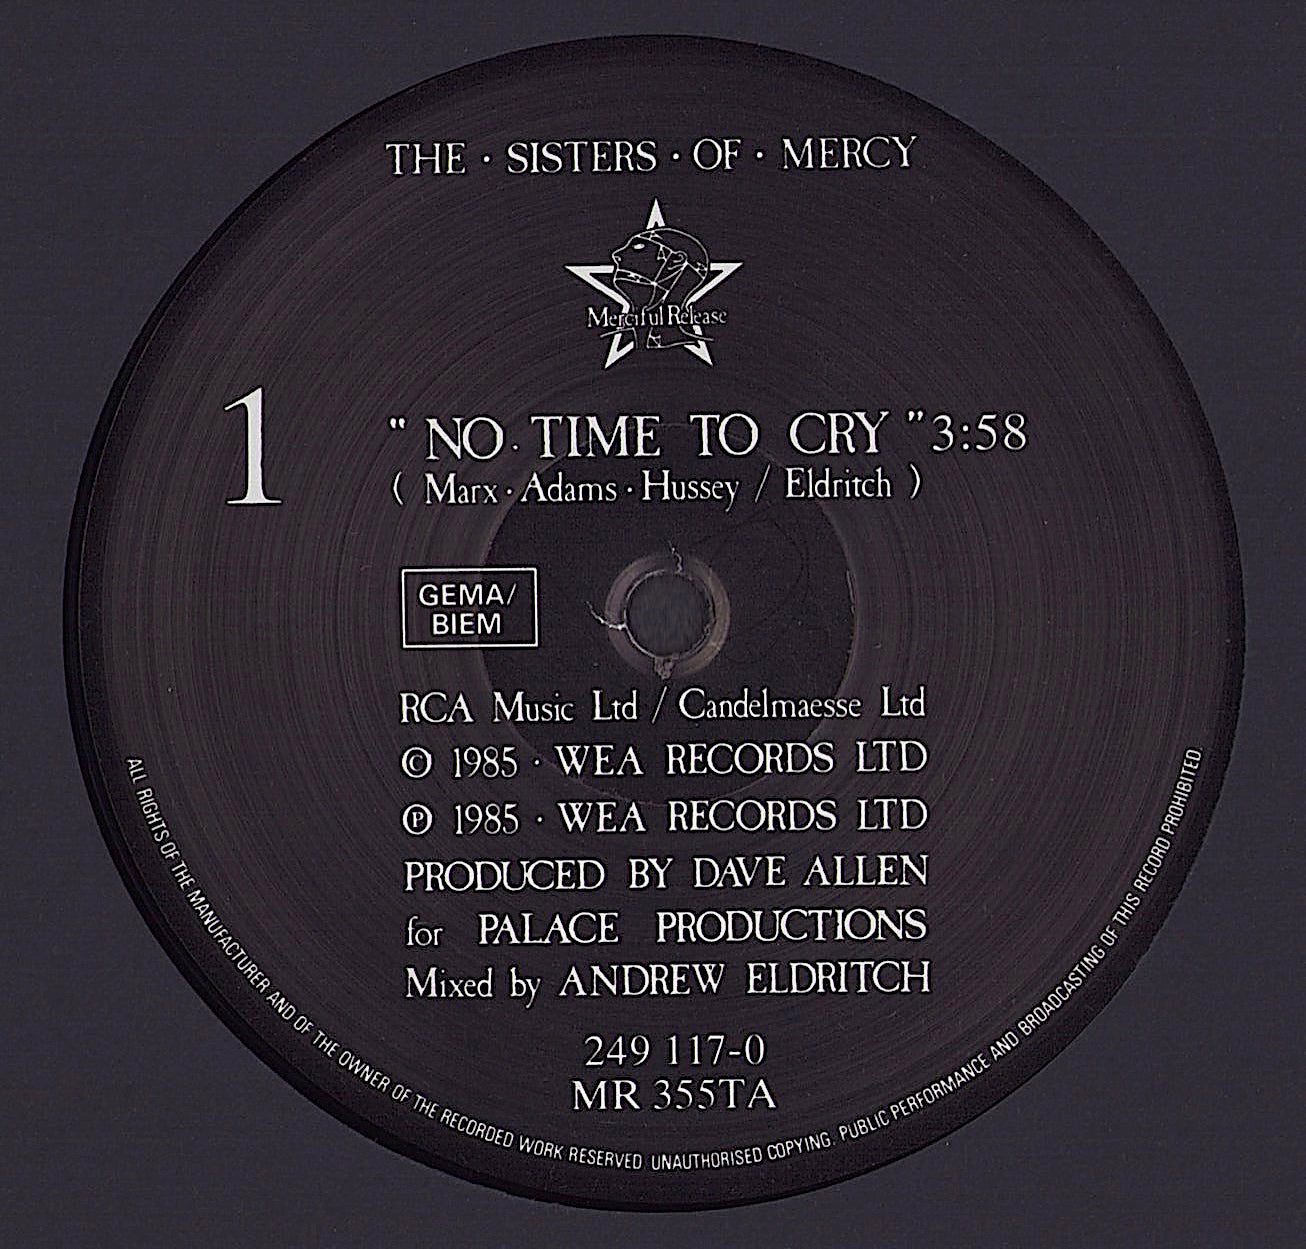 The Sisters Of Mercy ‎- No Time To Cry Vinyl 12"